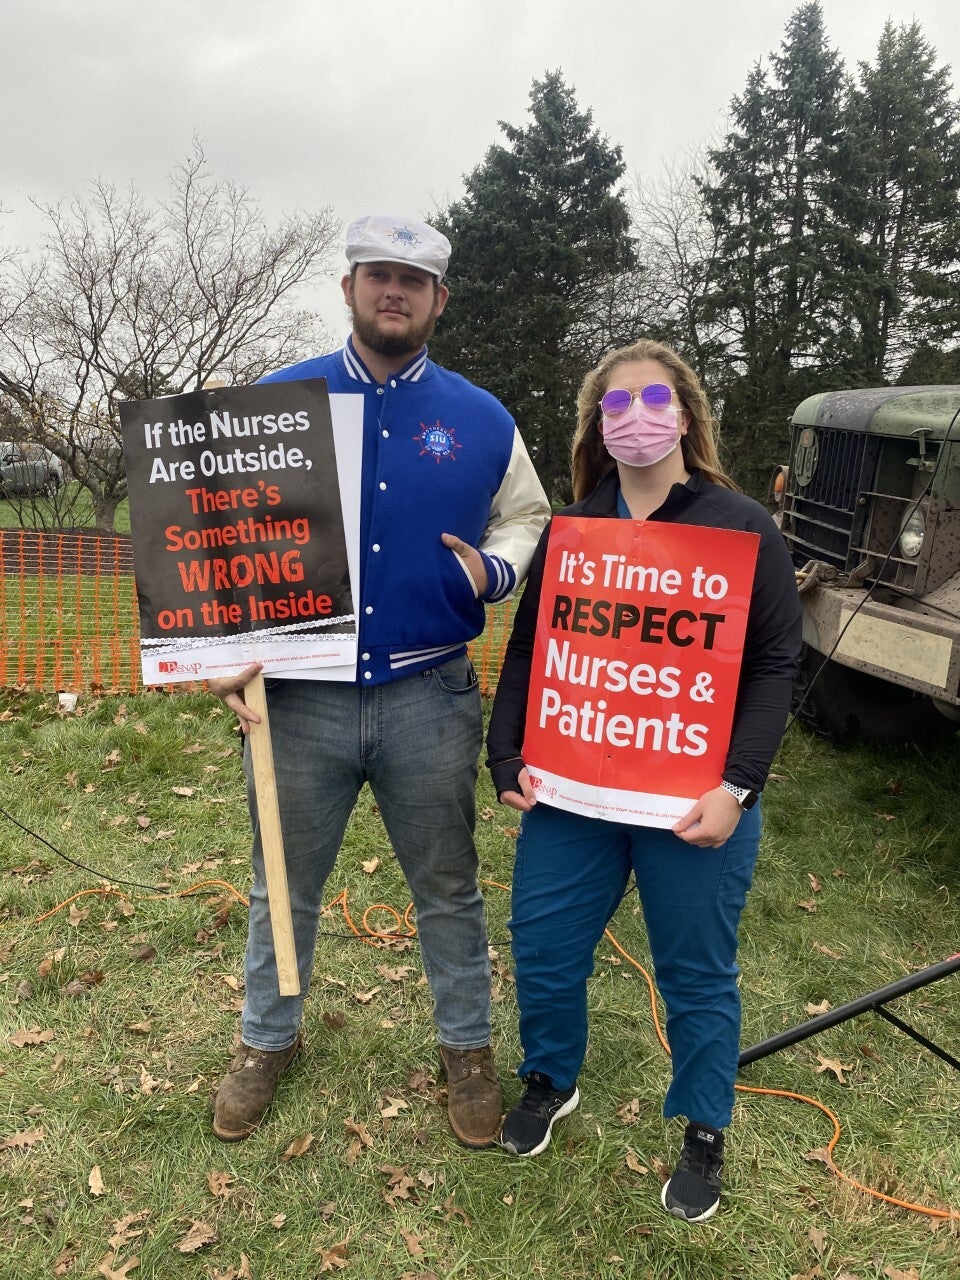 Julia Smith, right, and her brother Scott Smith Jr. at a walkout by St. Mary Medical Center nurses in November 2020. (Courtesy of Julia Smith)